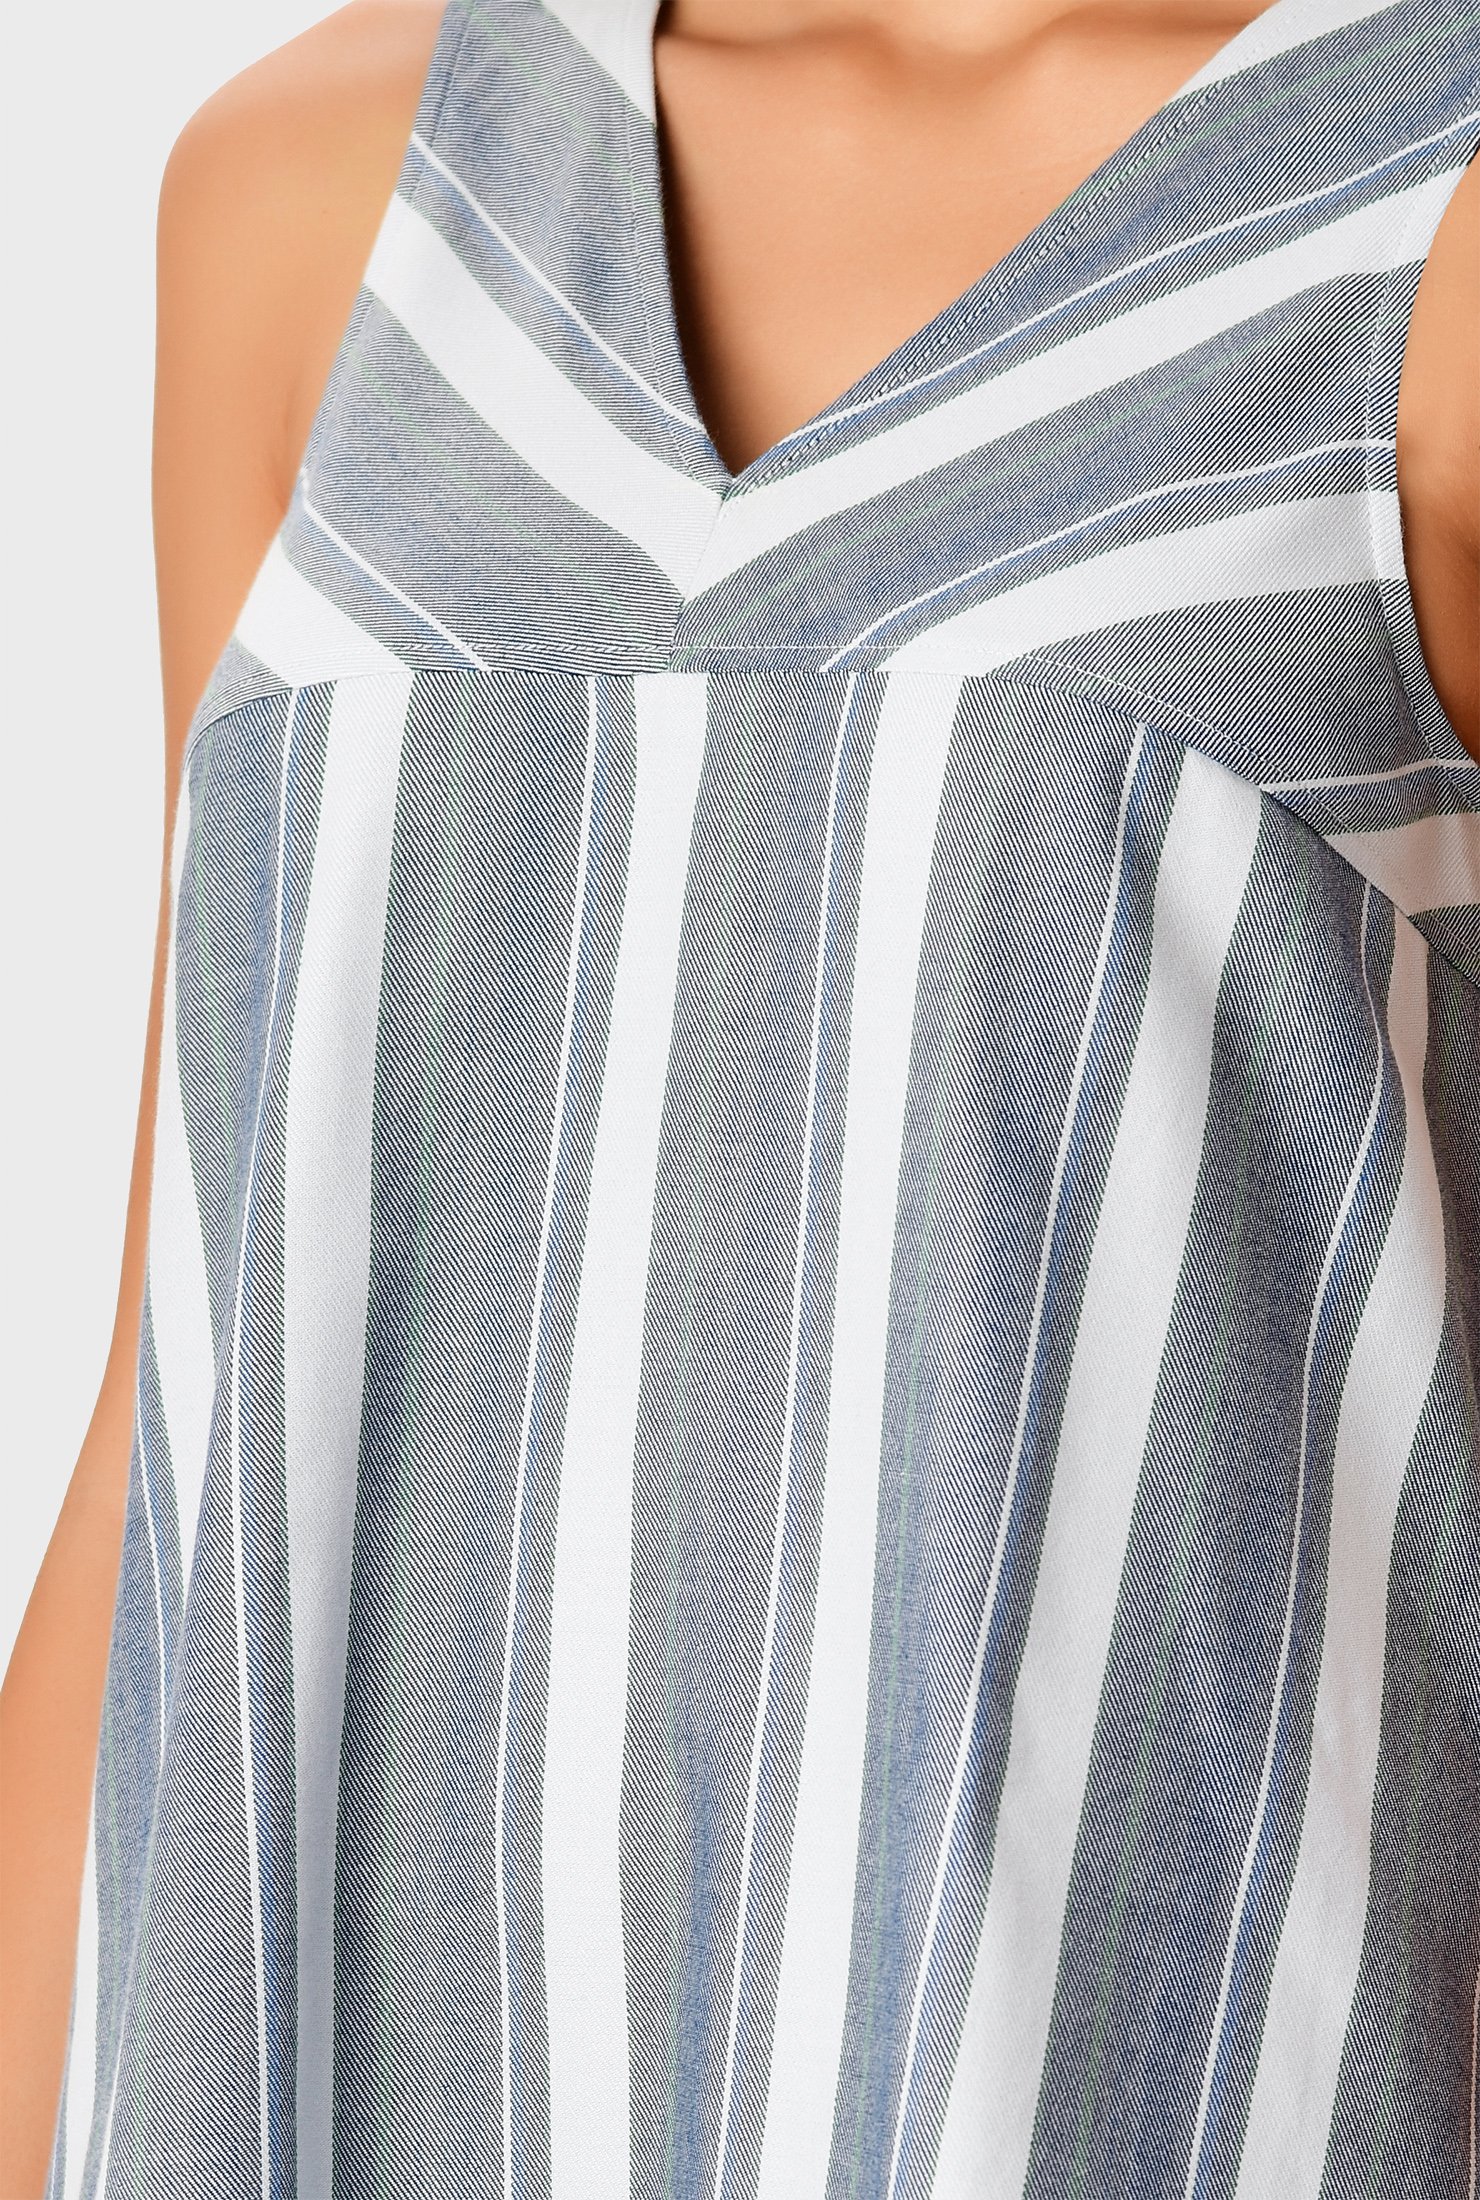 Shift shape to transform your mood! Our versatile stripe cotton twill dress is cut in a relaxed shift silhouette to strike that balance between comfort and style.